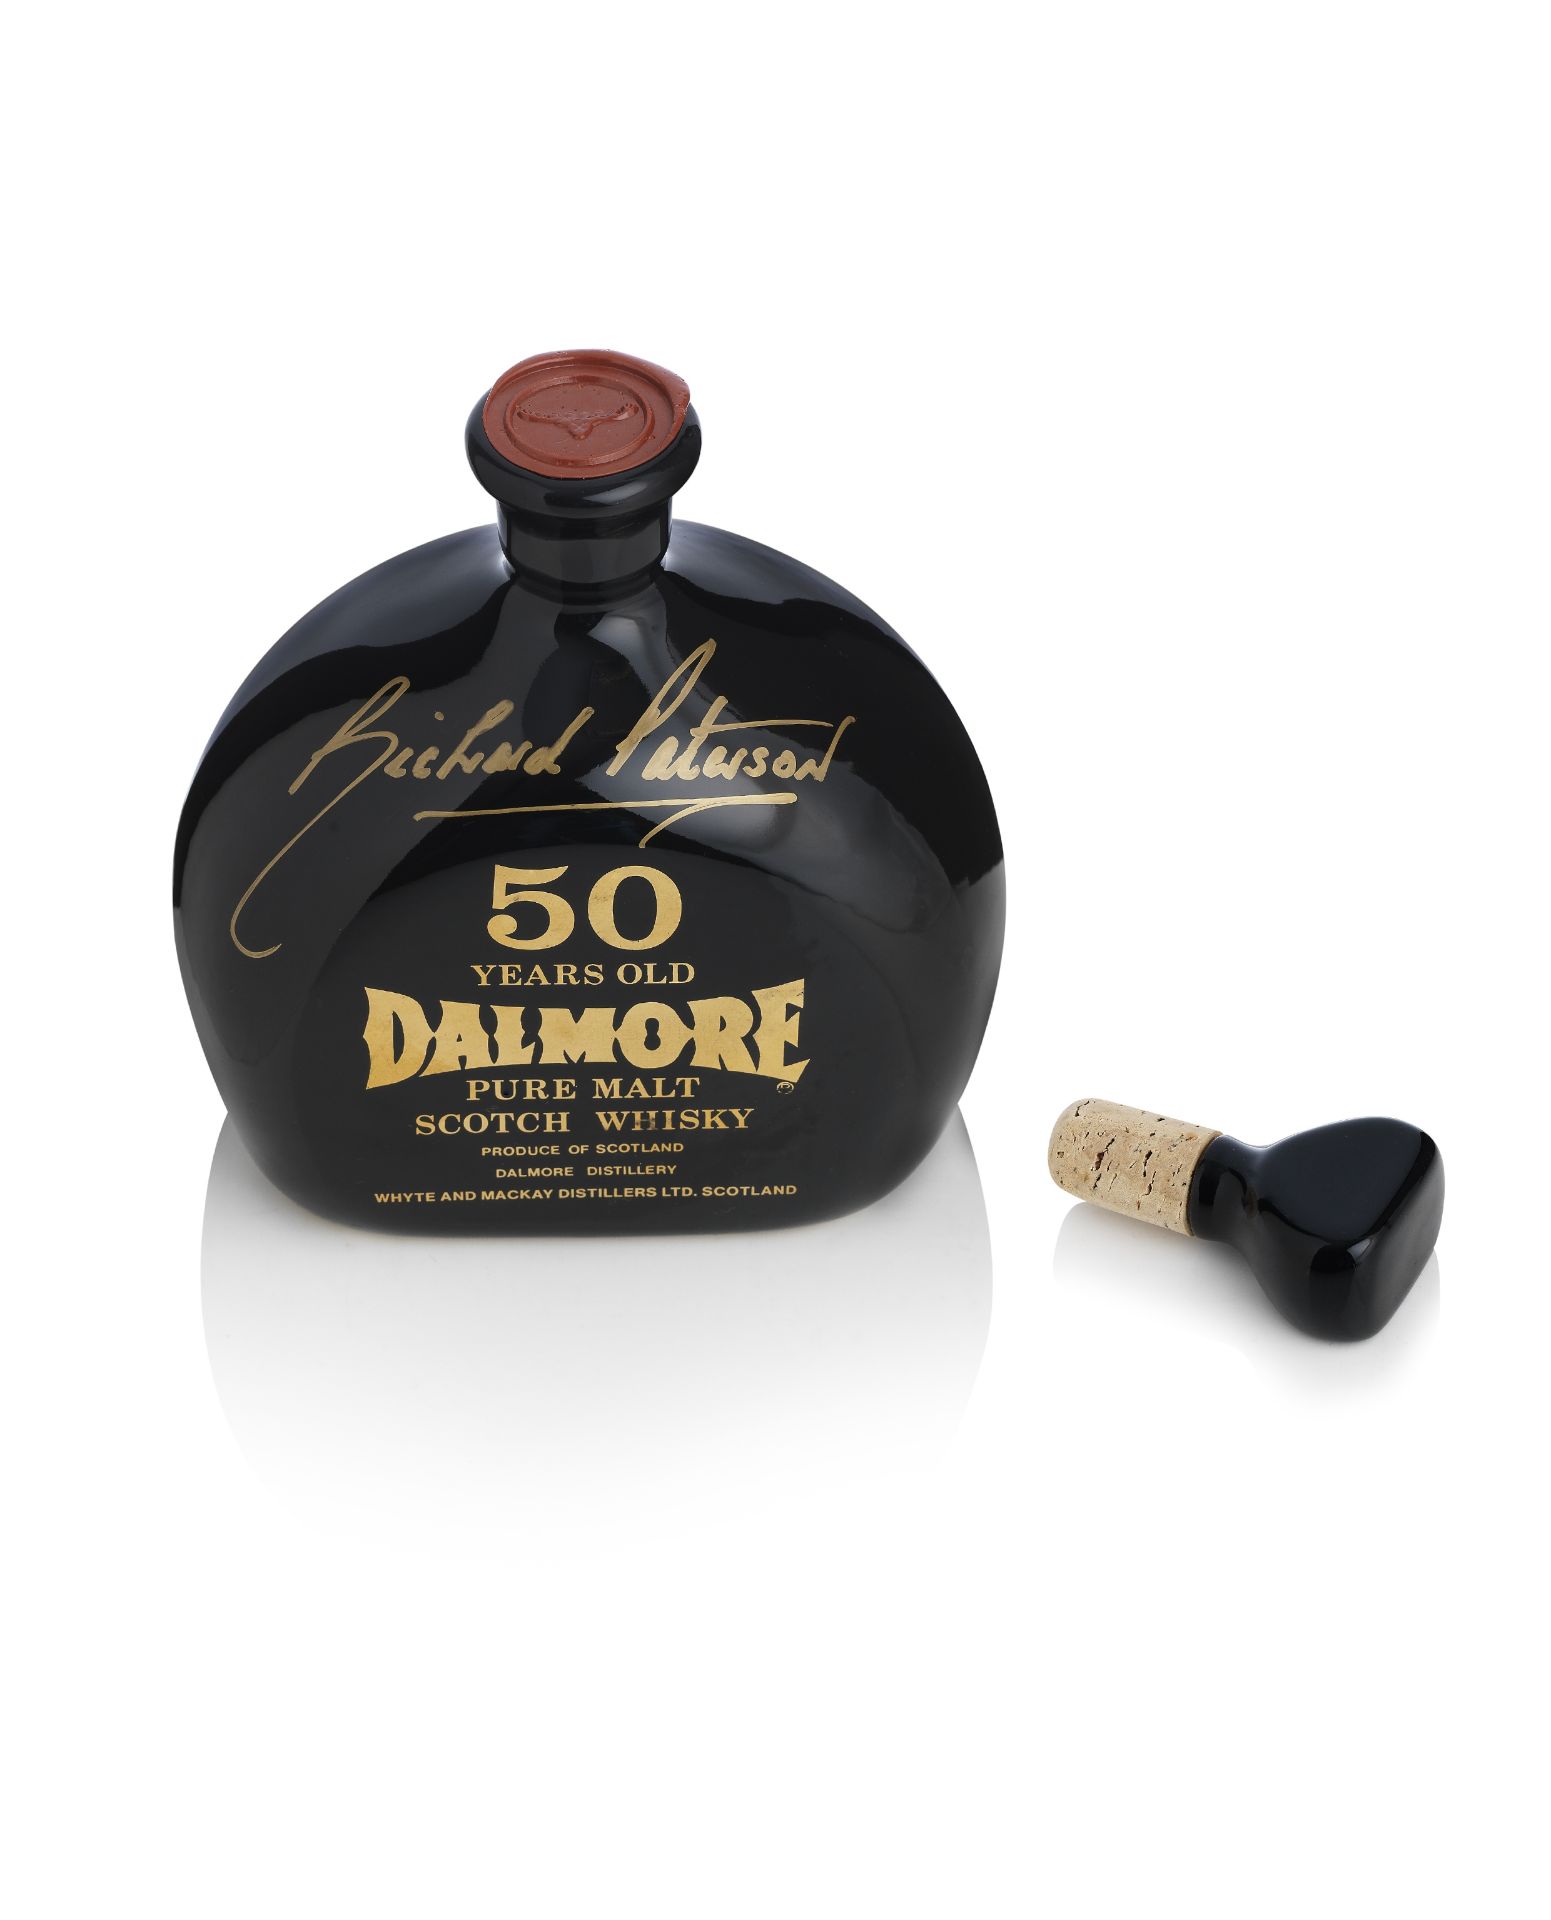 Dalmore-50 year old-1926